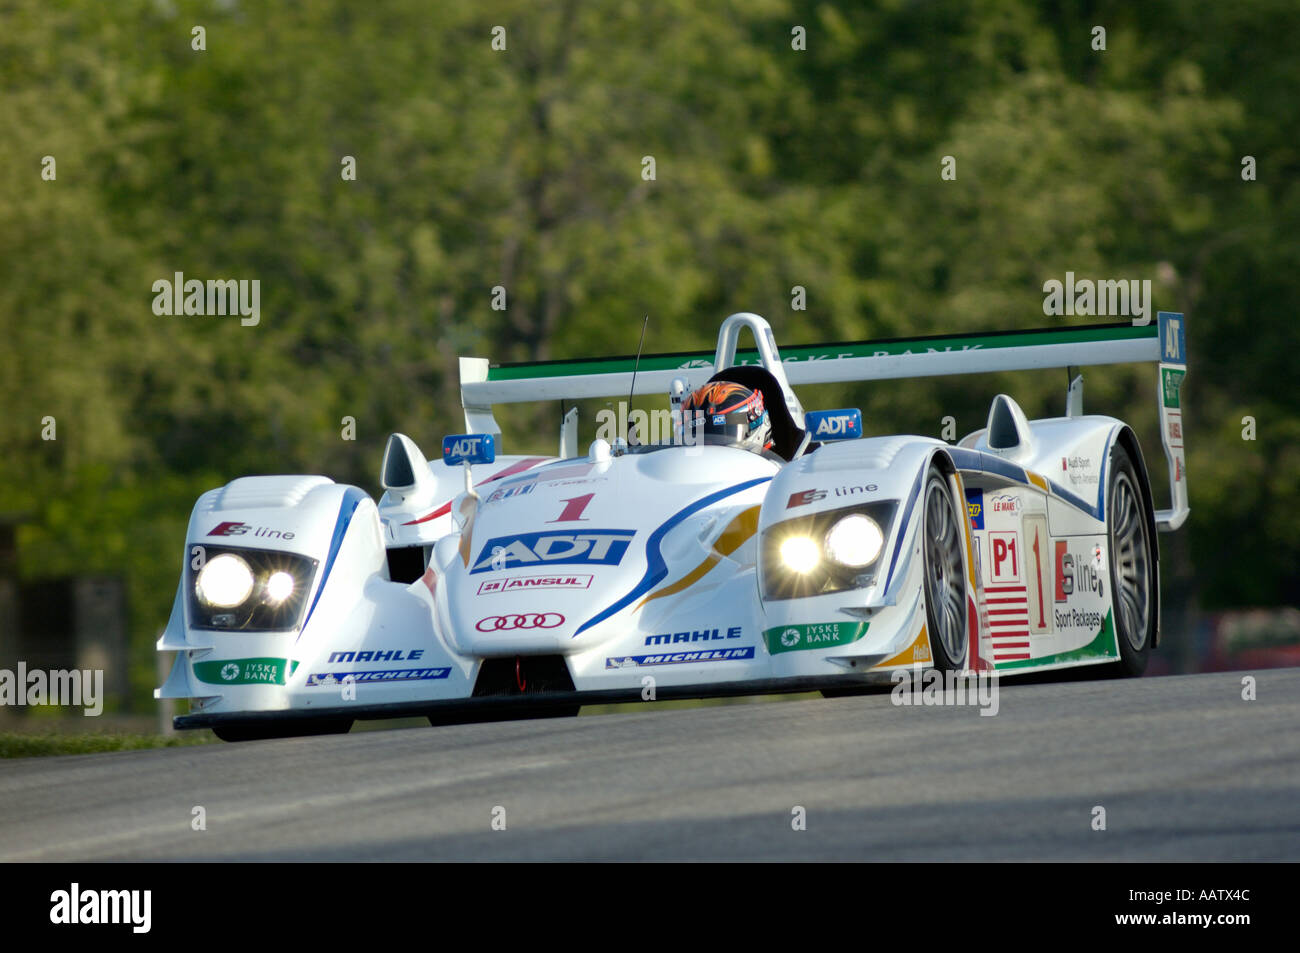 JJ Lehto drives the ADT Champion Audi R8 at the American Le Mans at Mid Ohio 2005 Stock Photo